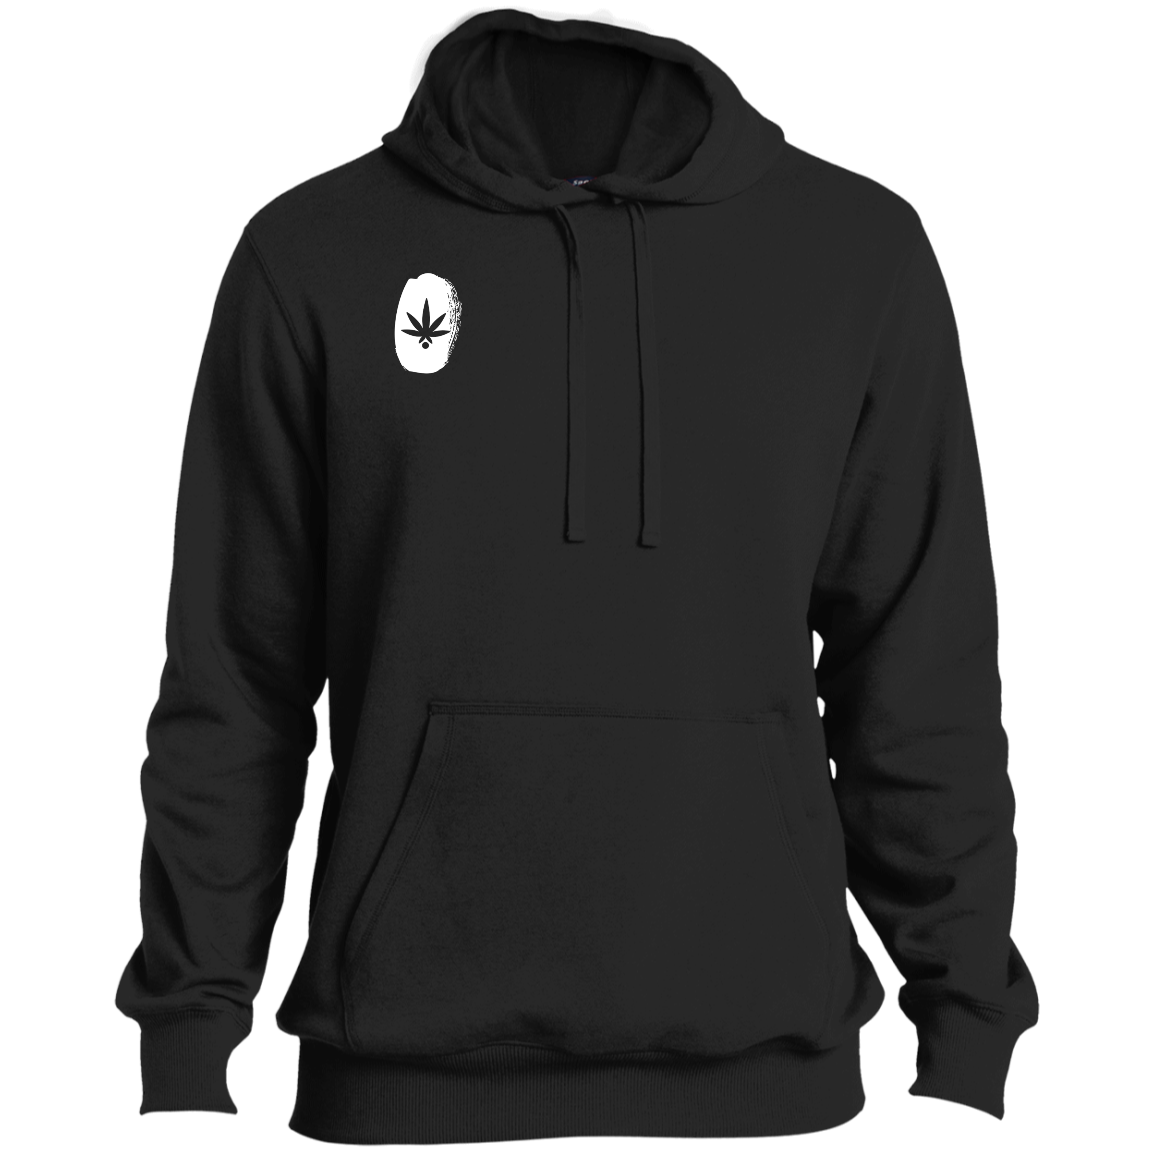 The People's Fingerprint Pullover Hoodie Right